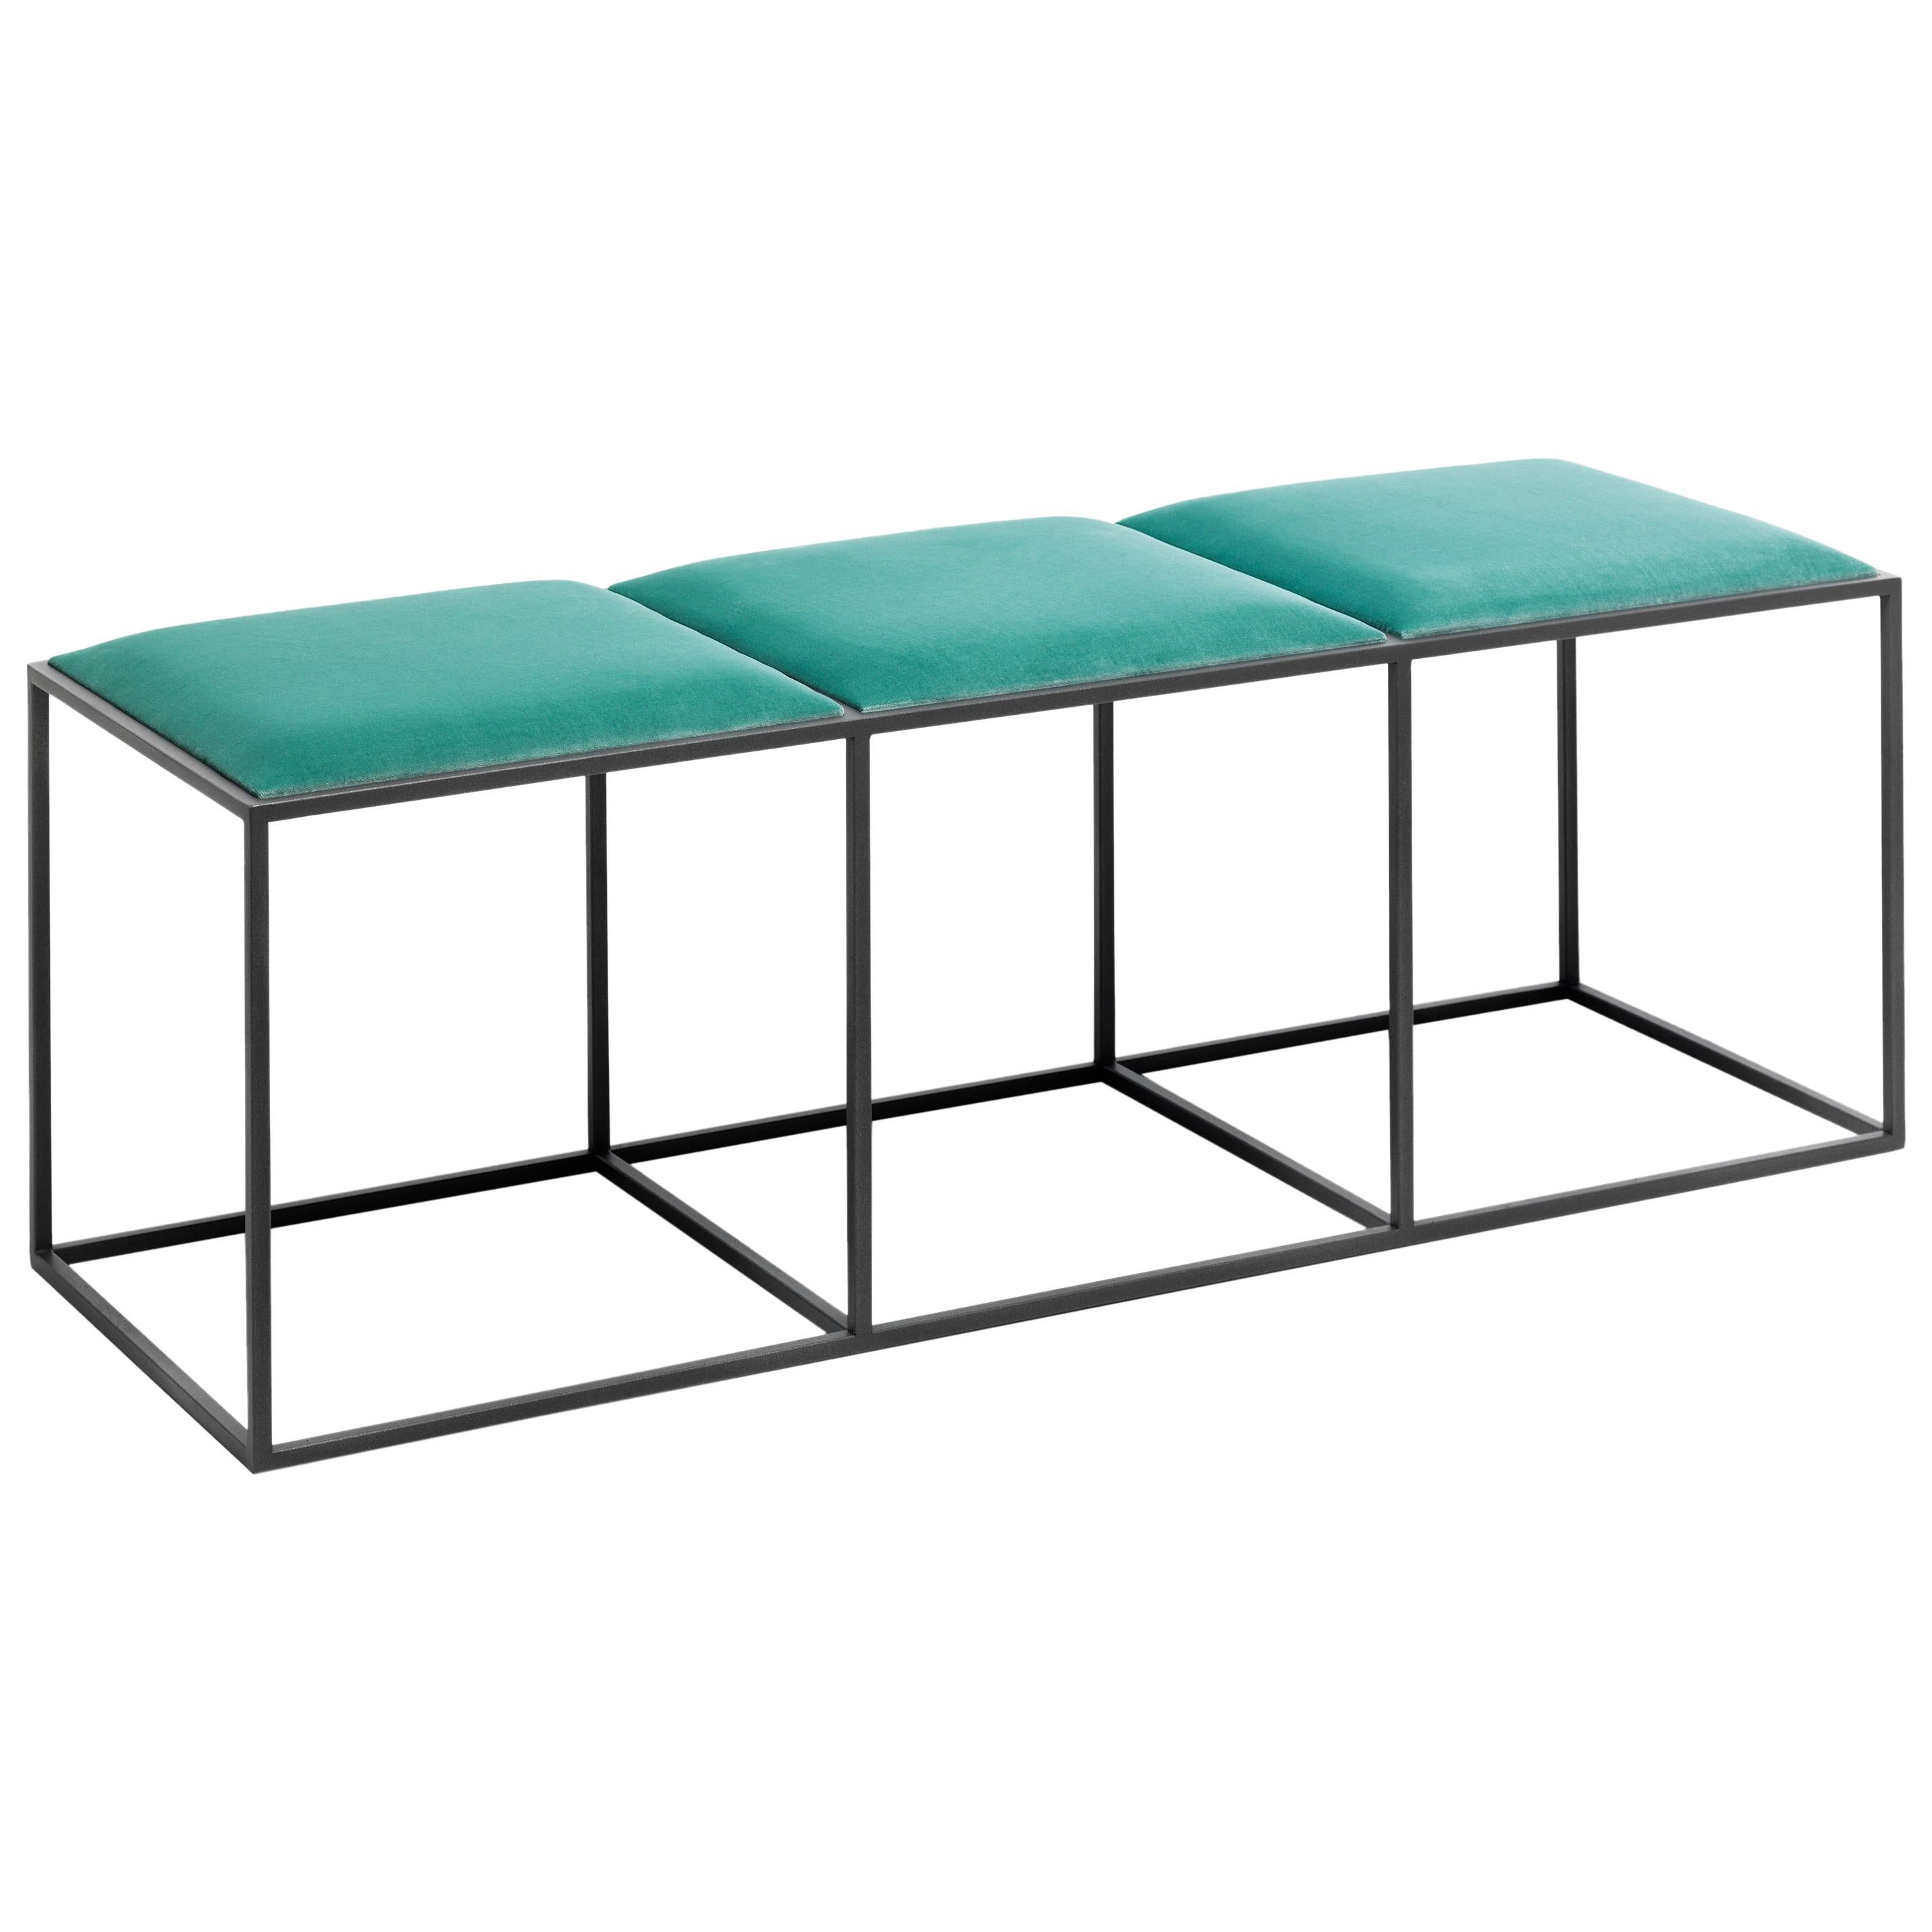 21st Century Modern Painted Steel Bench With Seats In Cotton Velvet For Sale